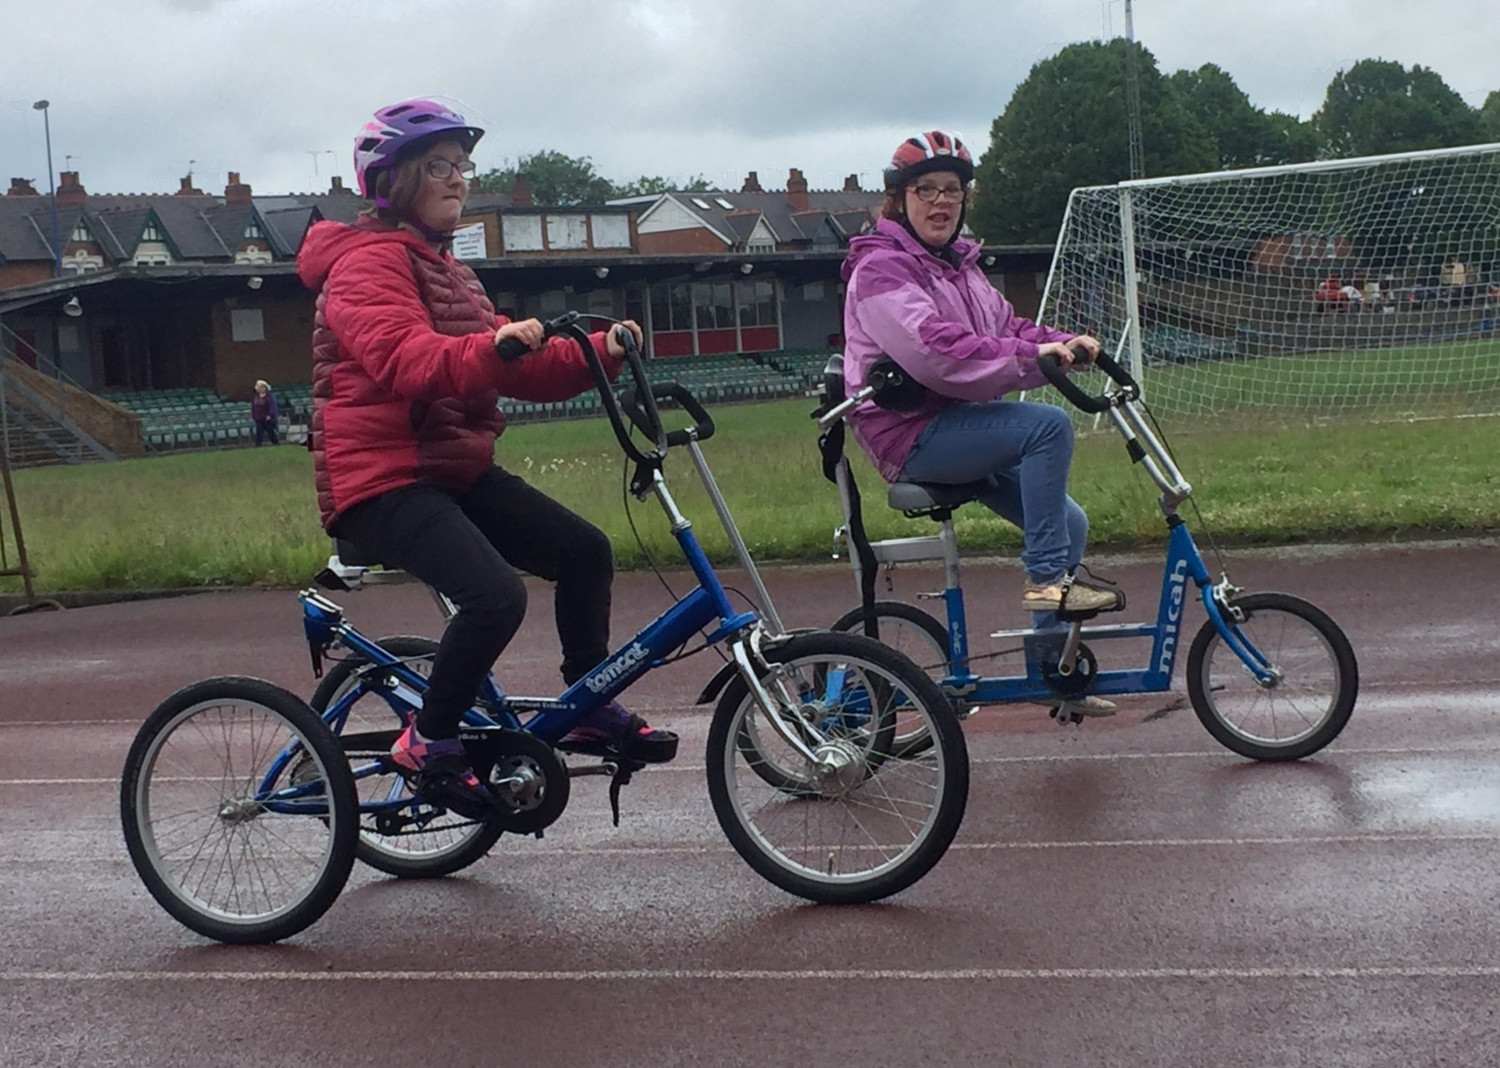 Riding adapted disabled bike on the track